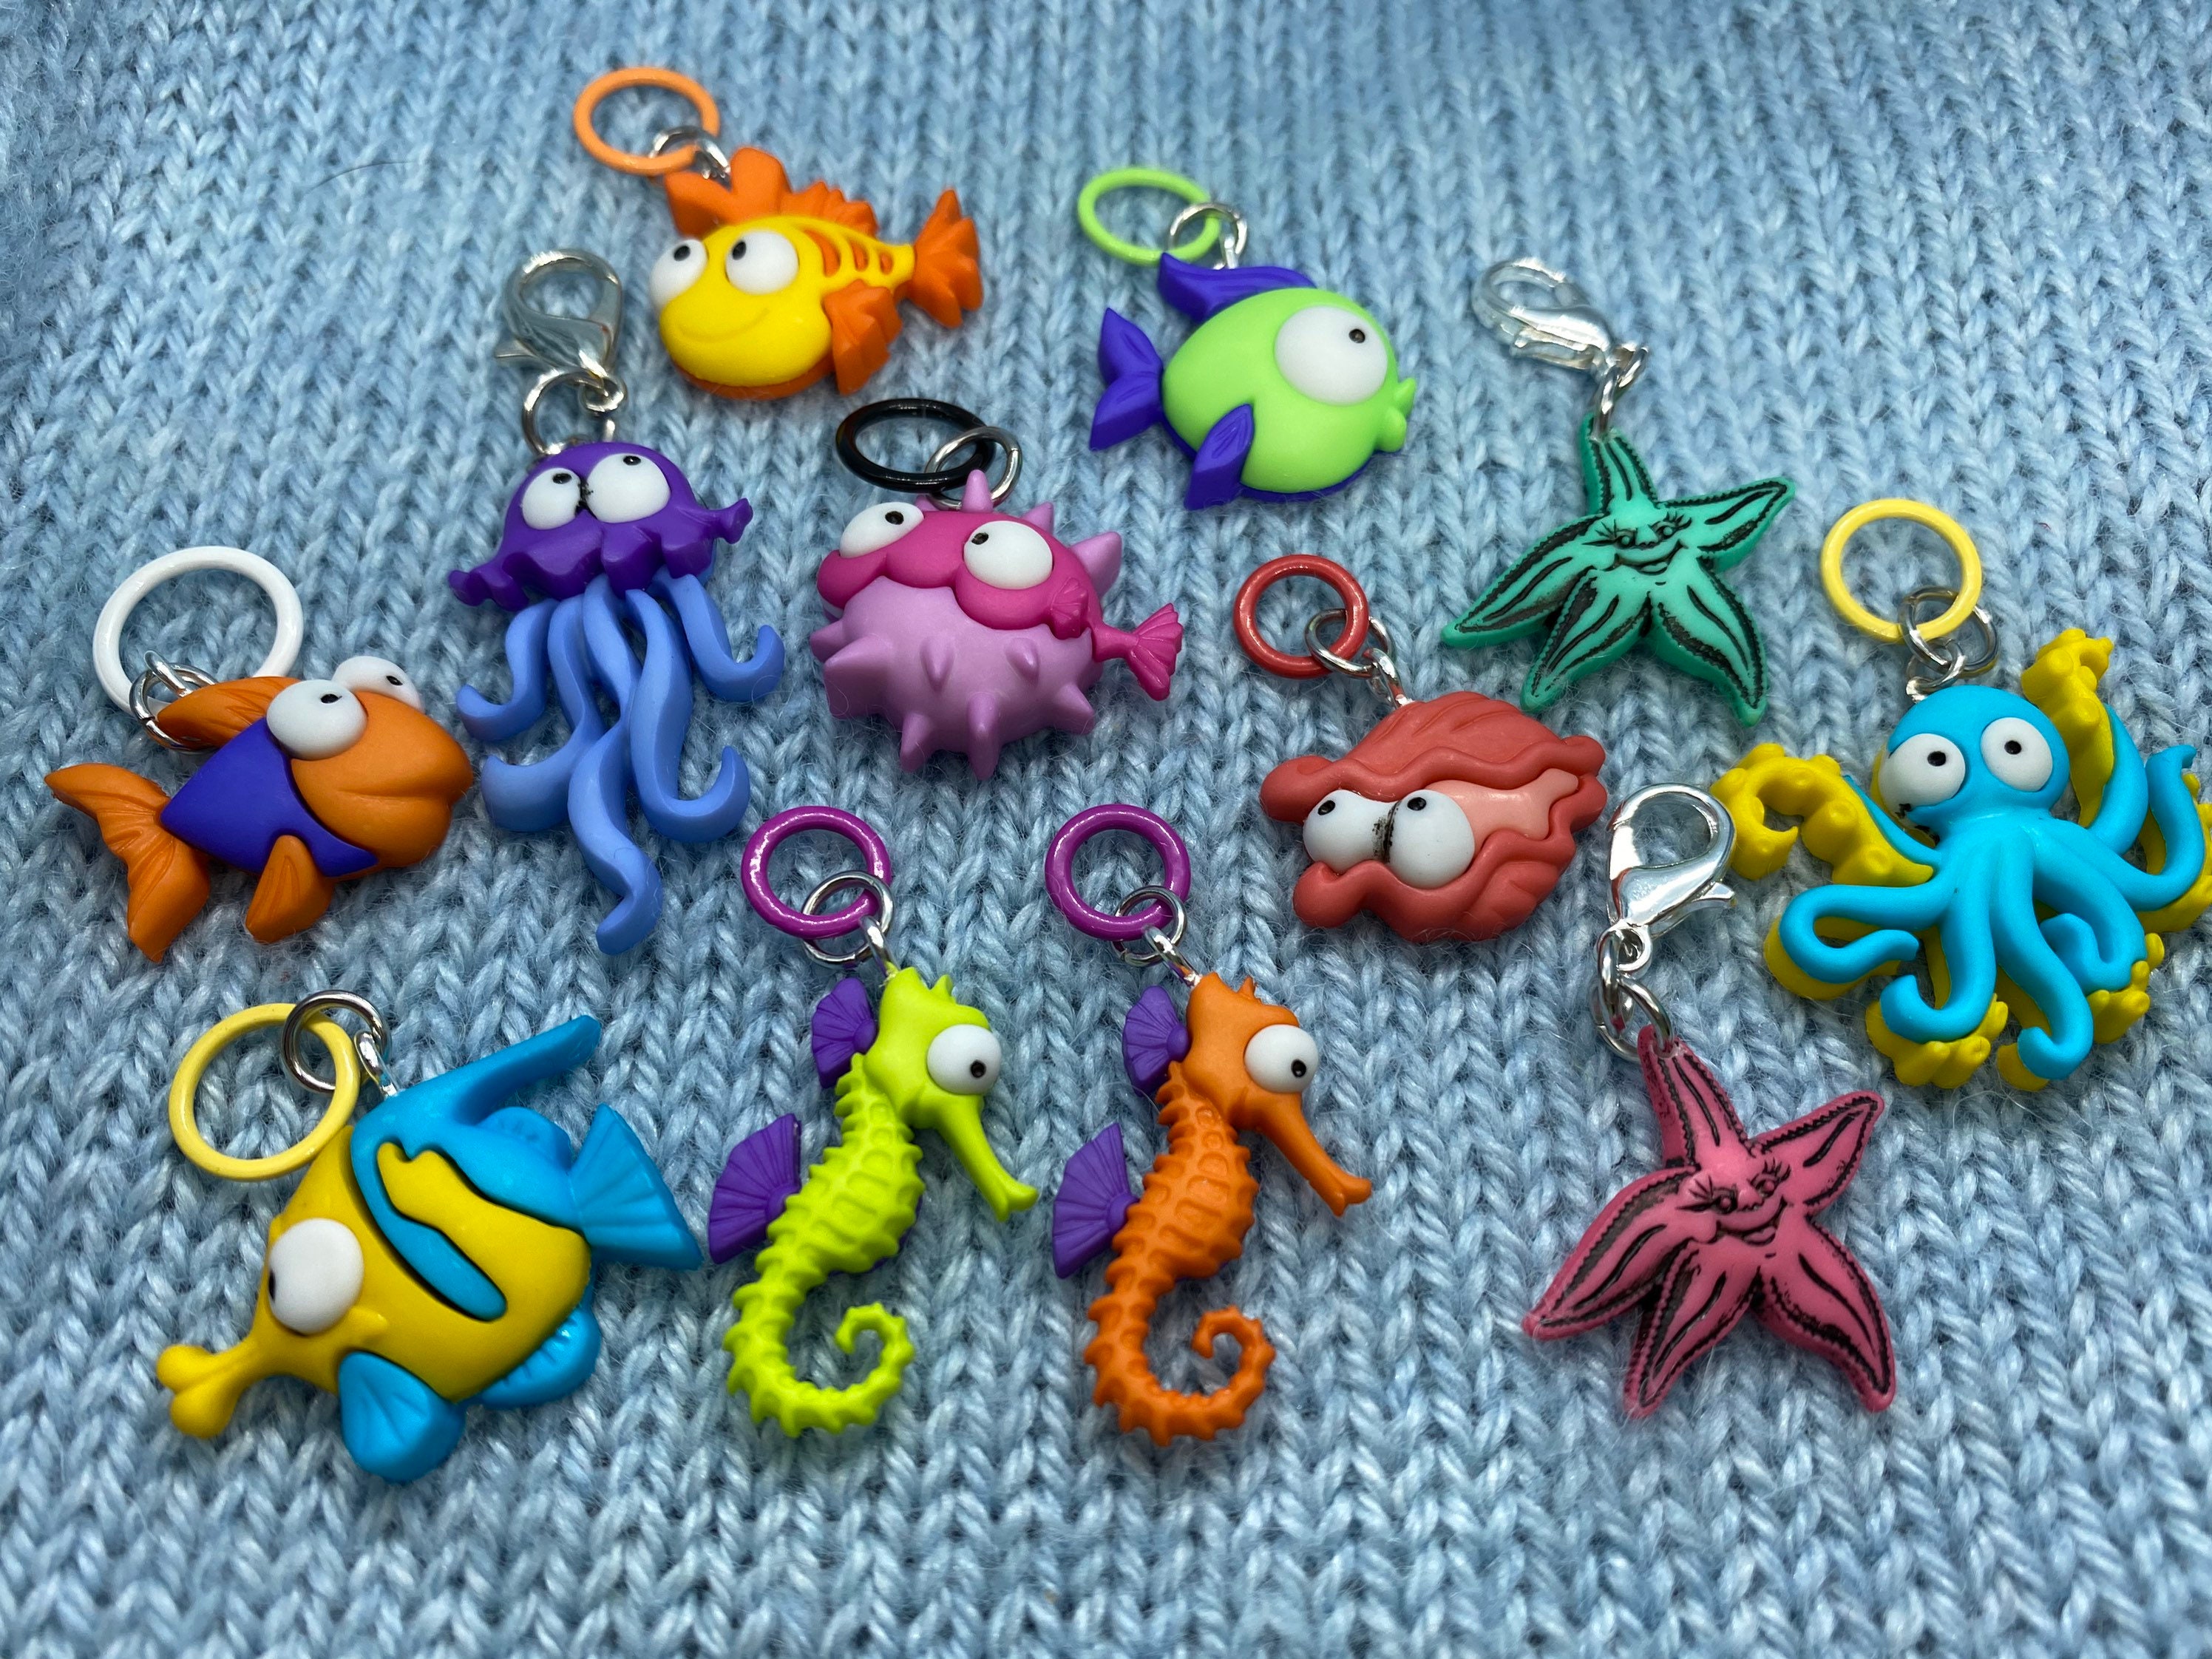 Stitch Markers - Sealed with a Kiss